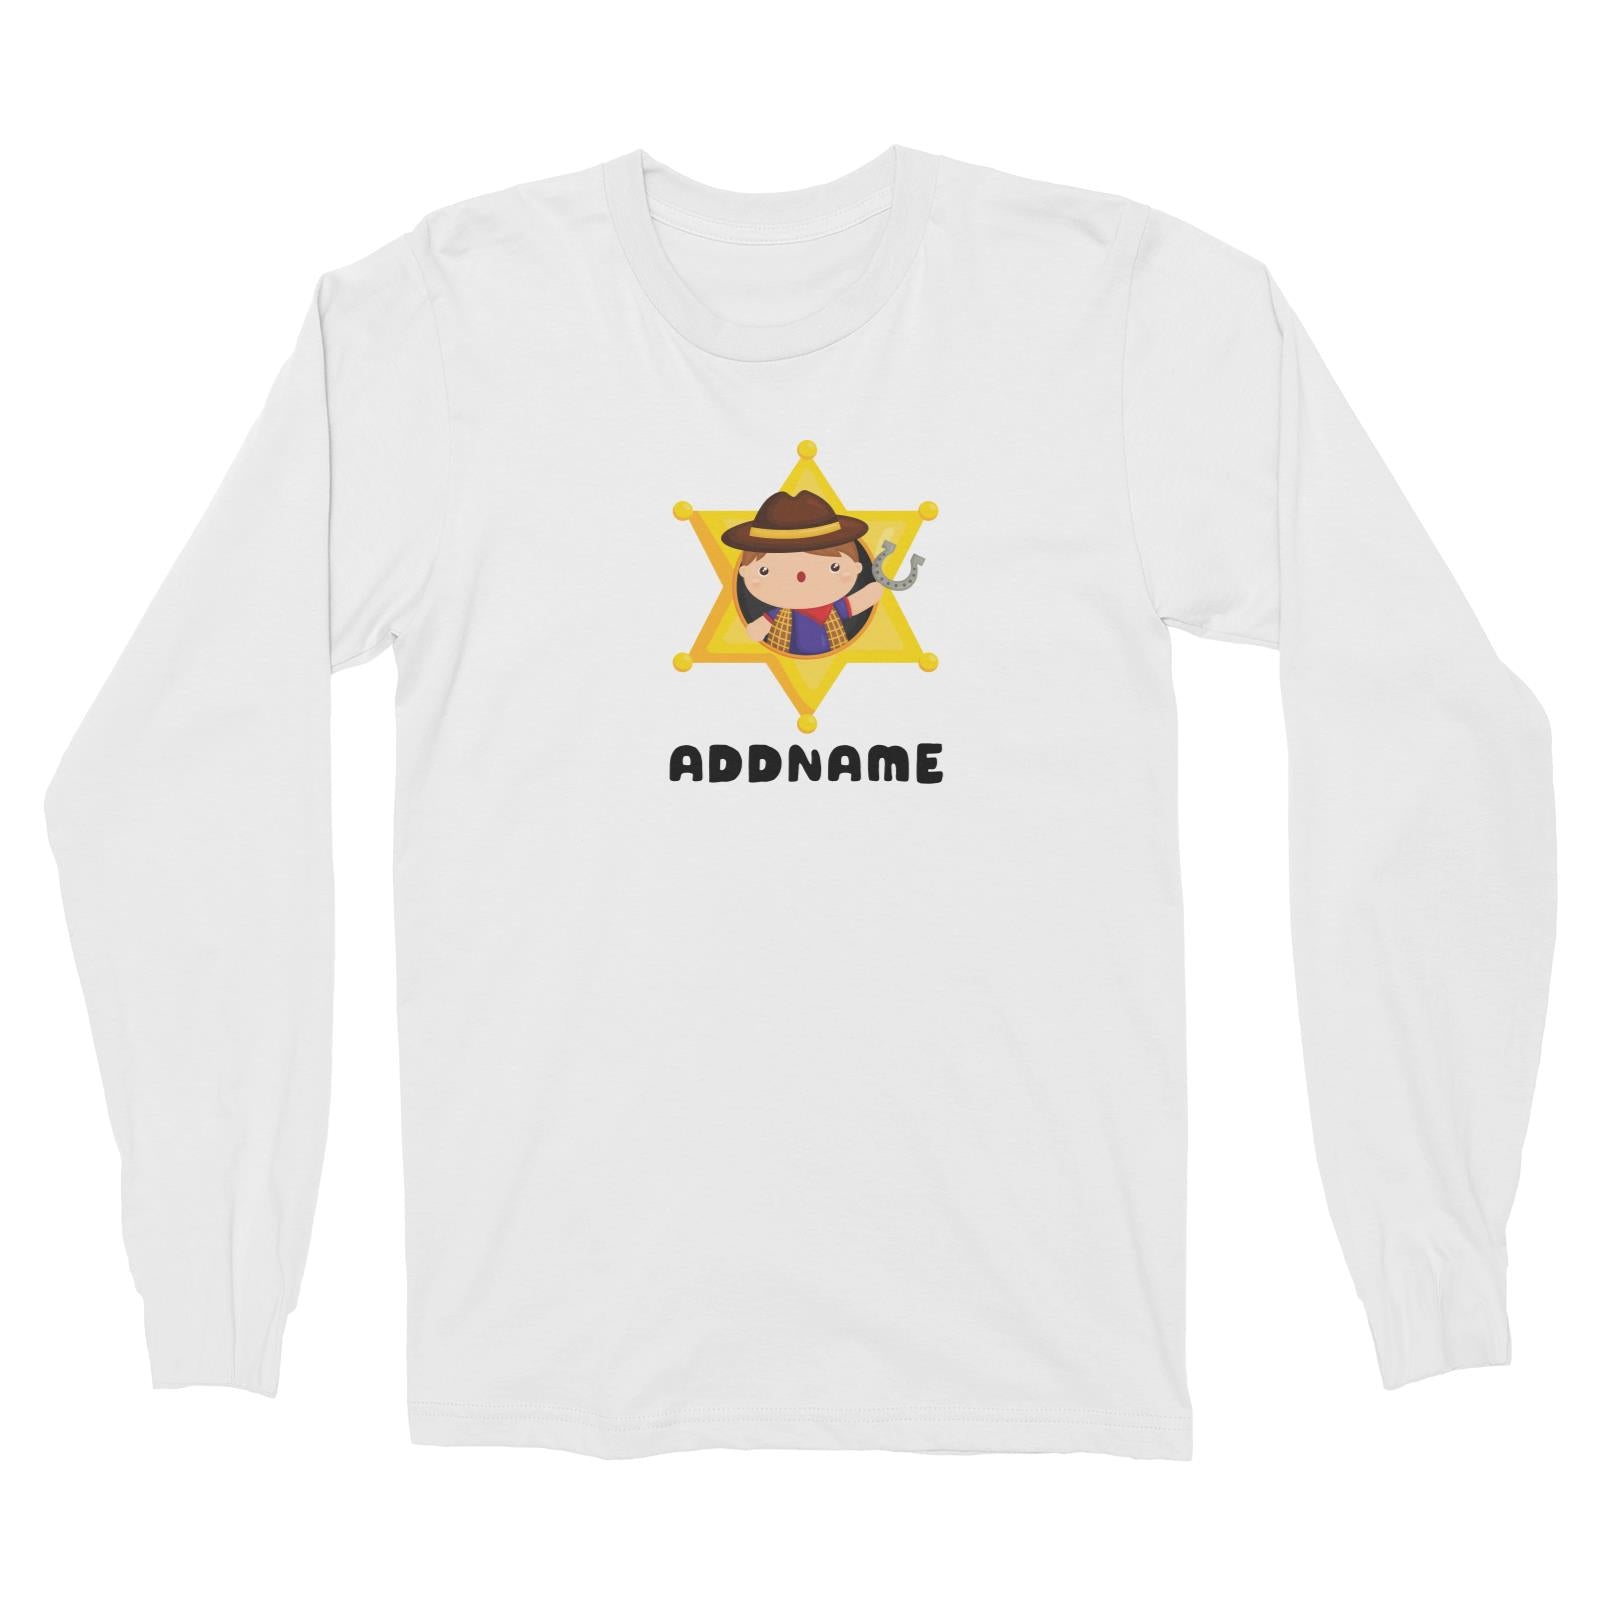 Birthday Cowboy Style Little Cowboy Holding Hoe In Star Badge Addname Long Sleeve Unisex T-Shirt